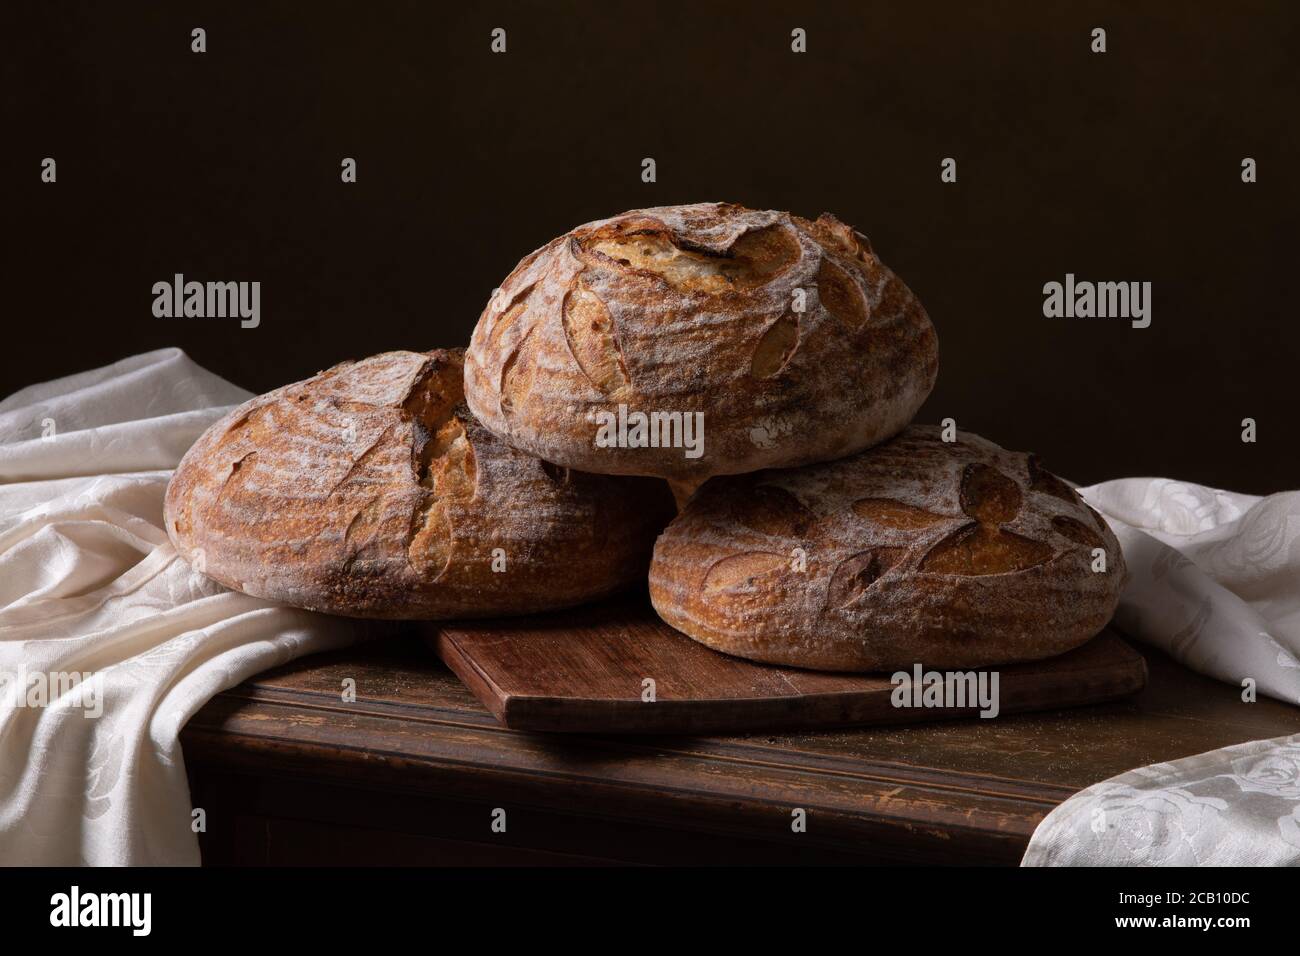 Freshly baked sourdough bread with floral decoration on it Stock Photo